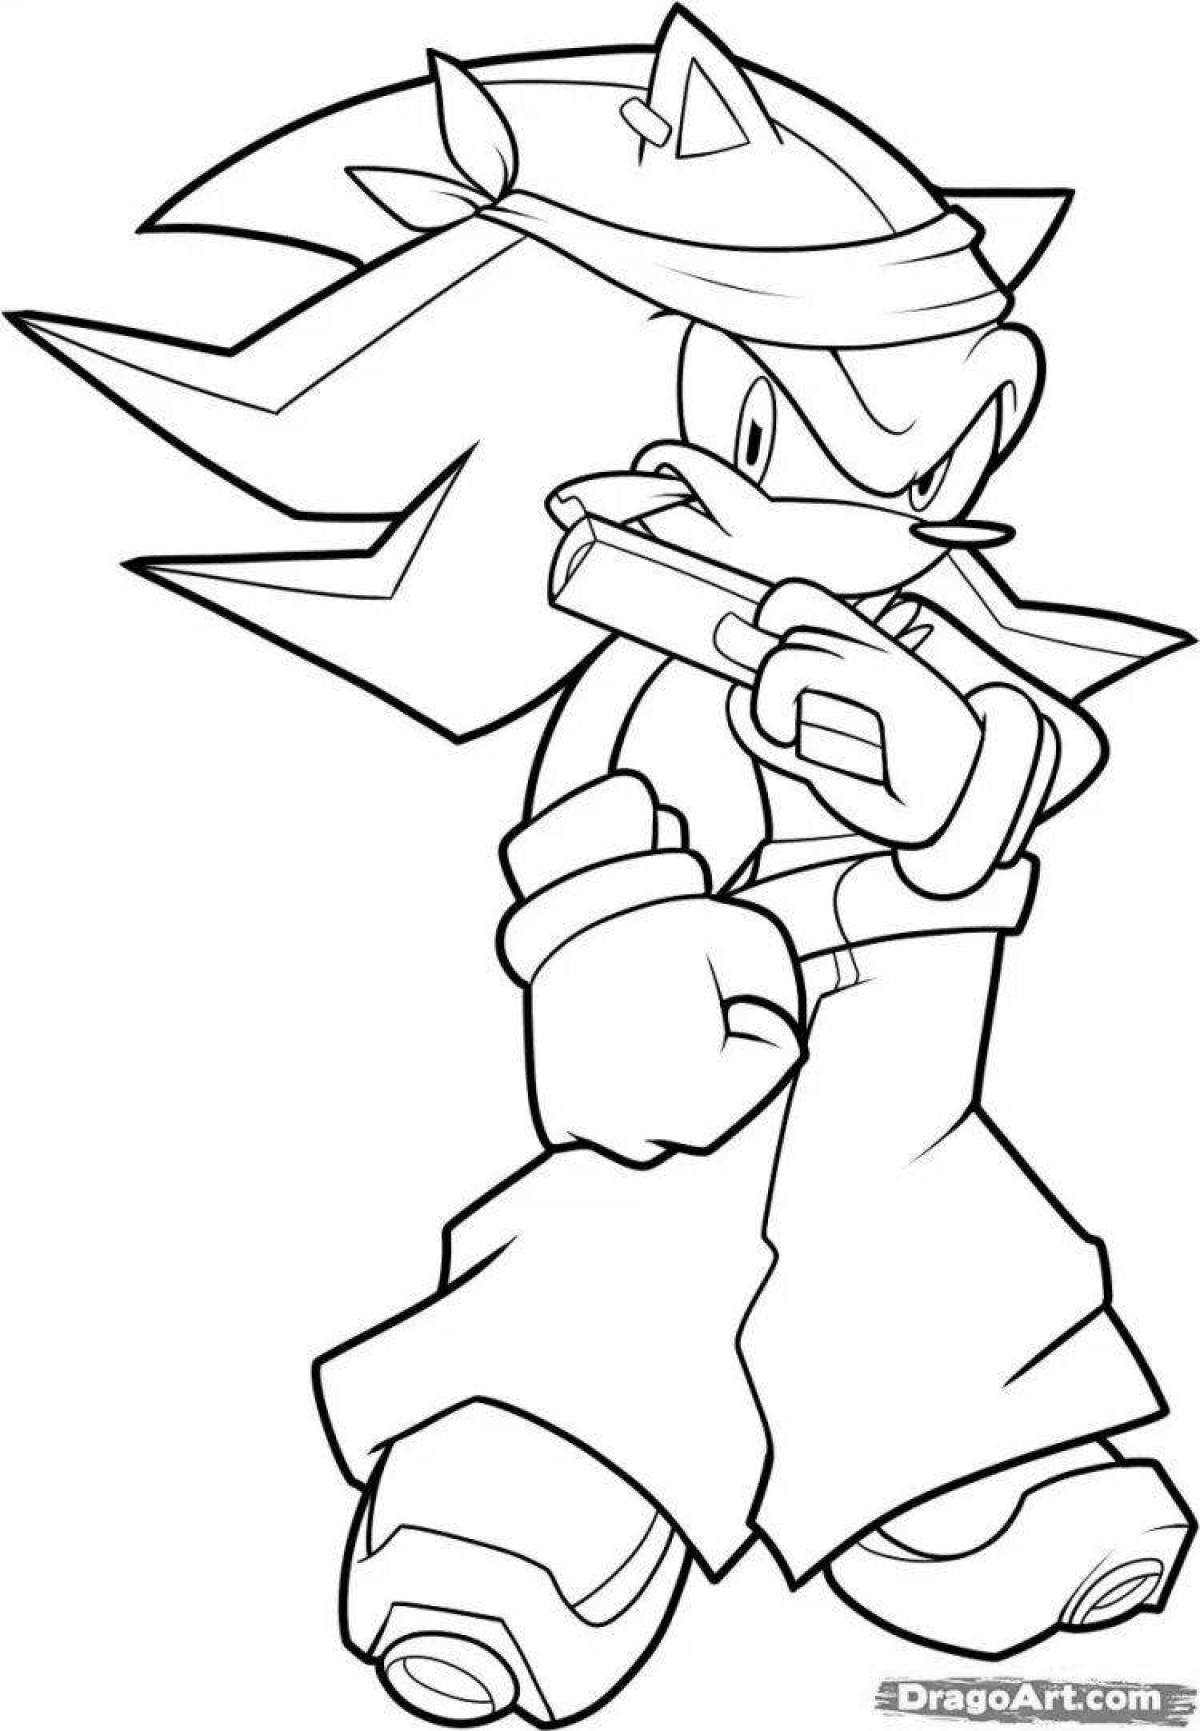 Coloring page of bright metallic shadows